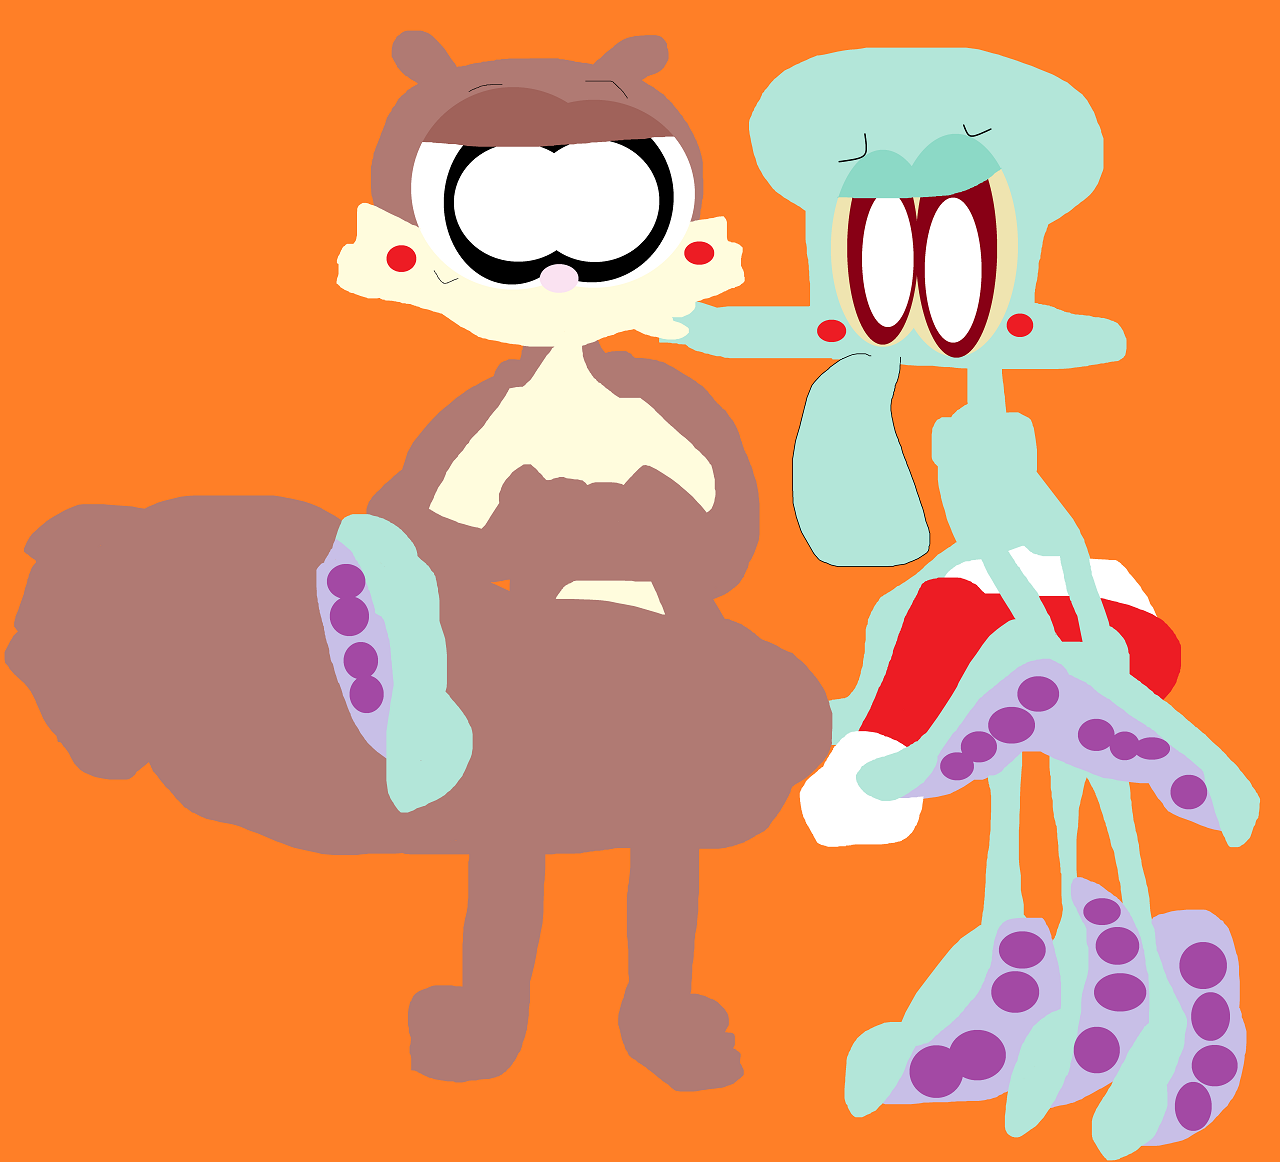 Squidward And Sandy's Christmas Cover Up Alt by Falconlobo